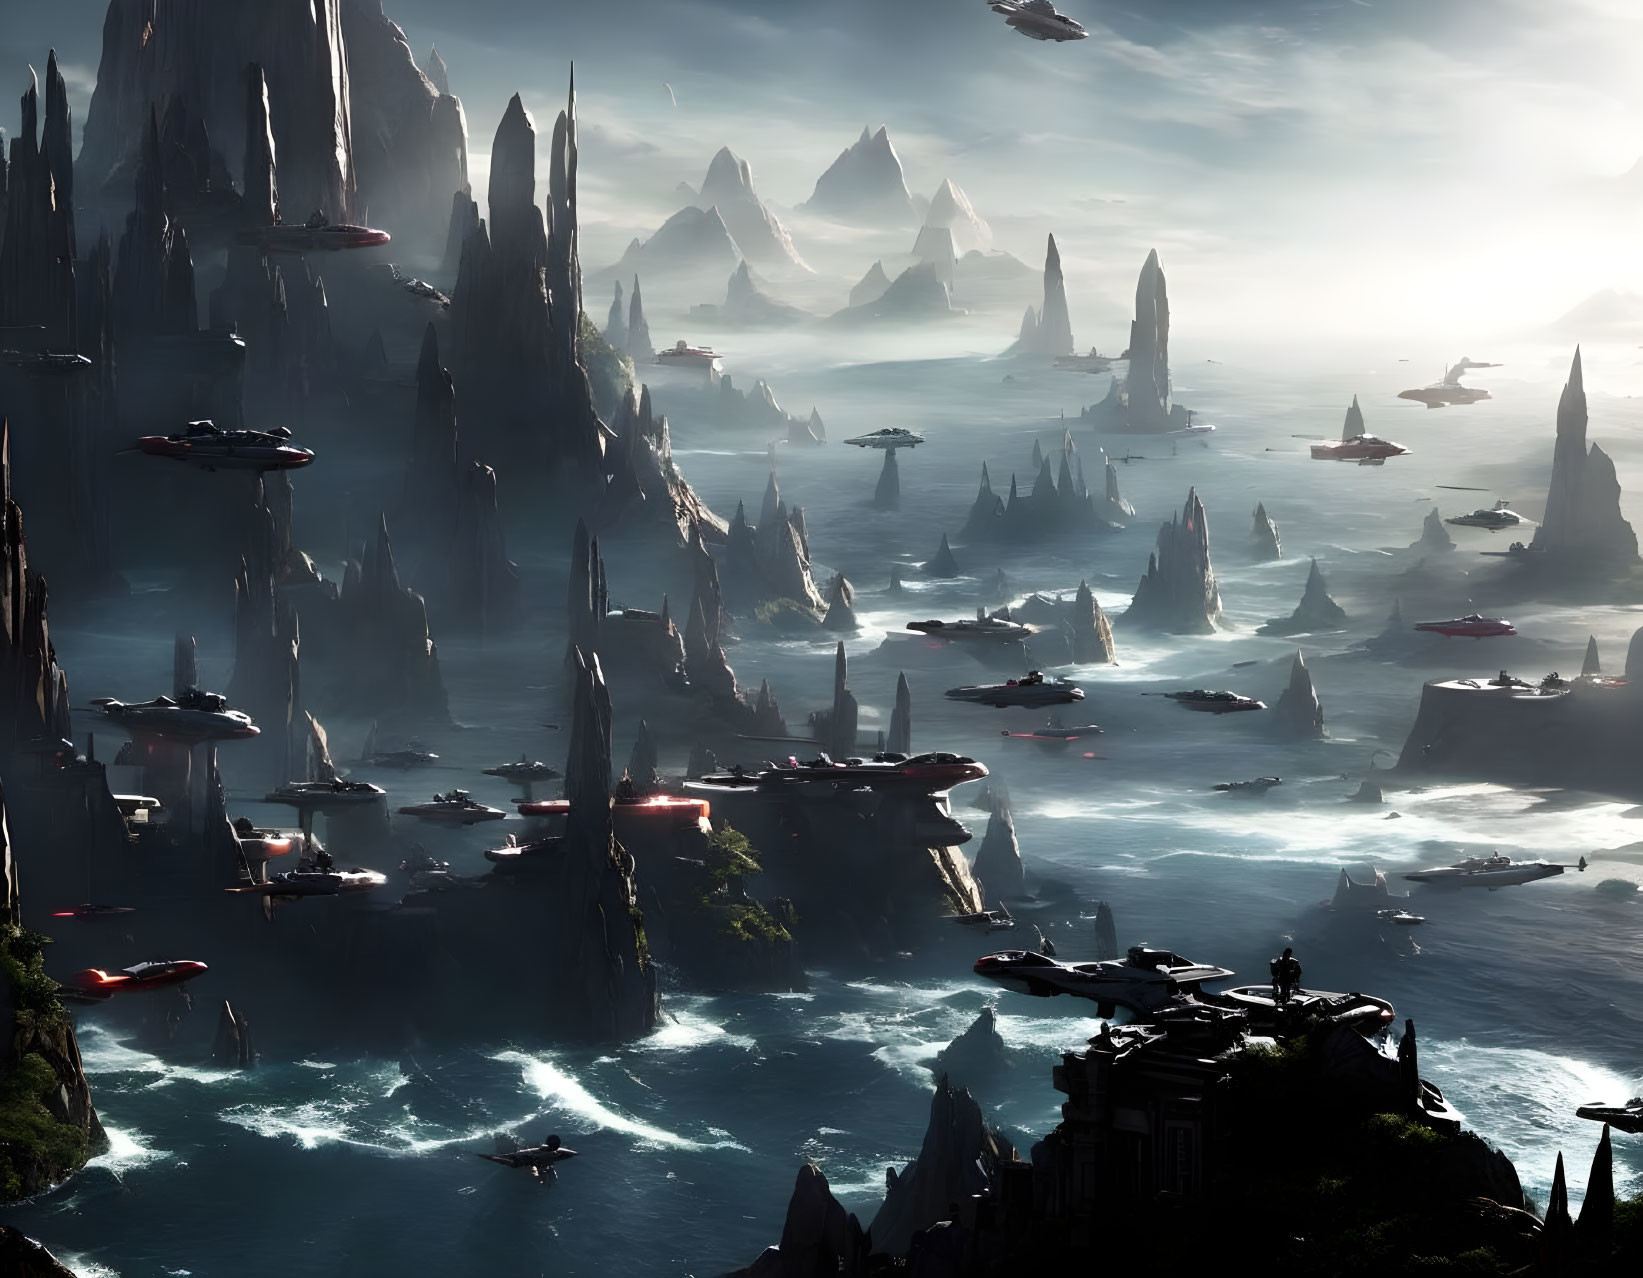 Futuristic flying vehicles over misty ocean with rocky spires on cliff edges